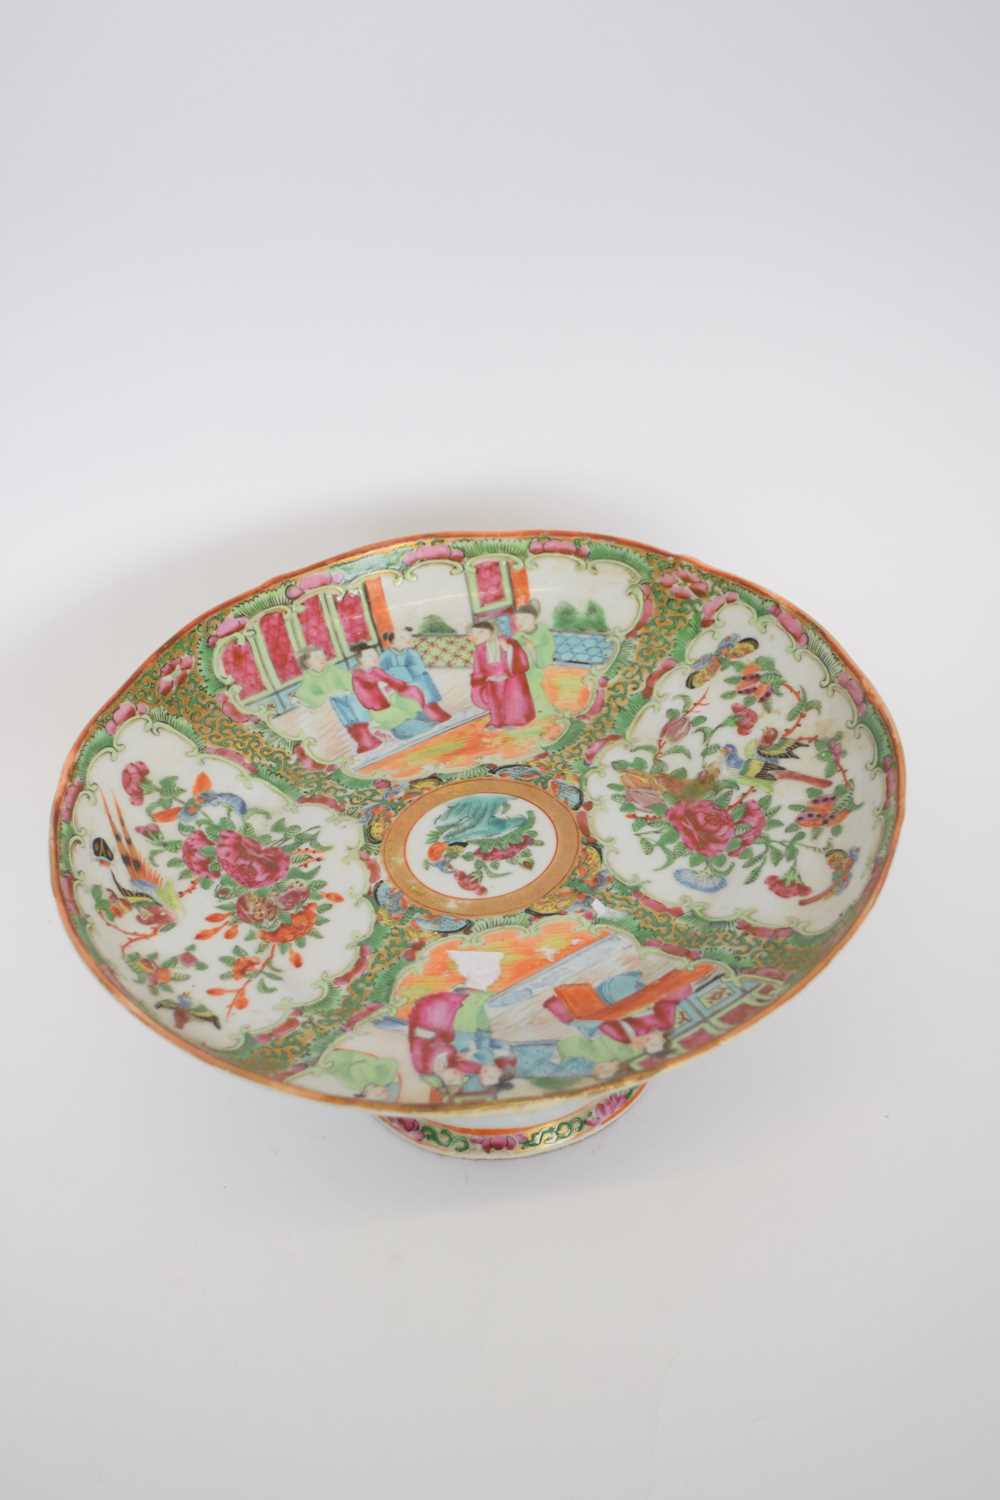 Cantonese porcelain tazza with typical designs of panels, figures, alternating with panels of - Image 4 of 8